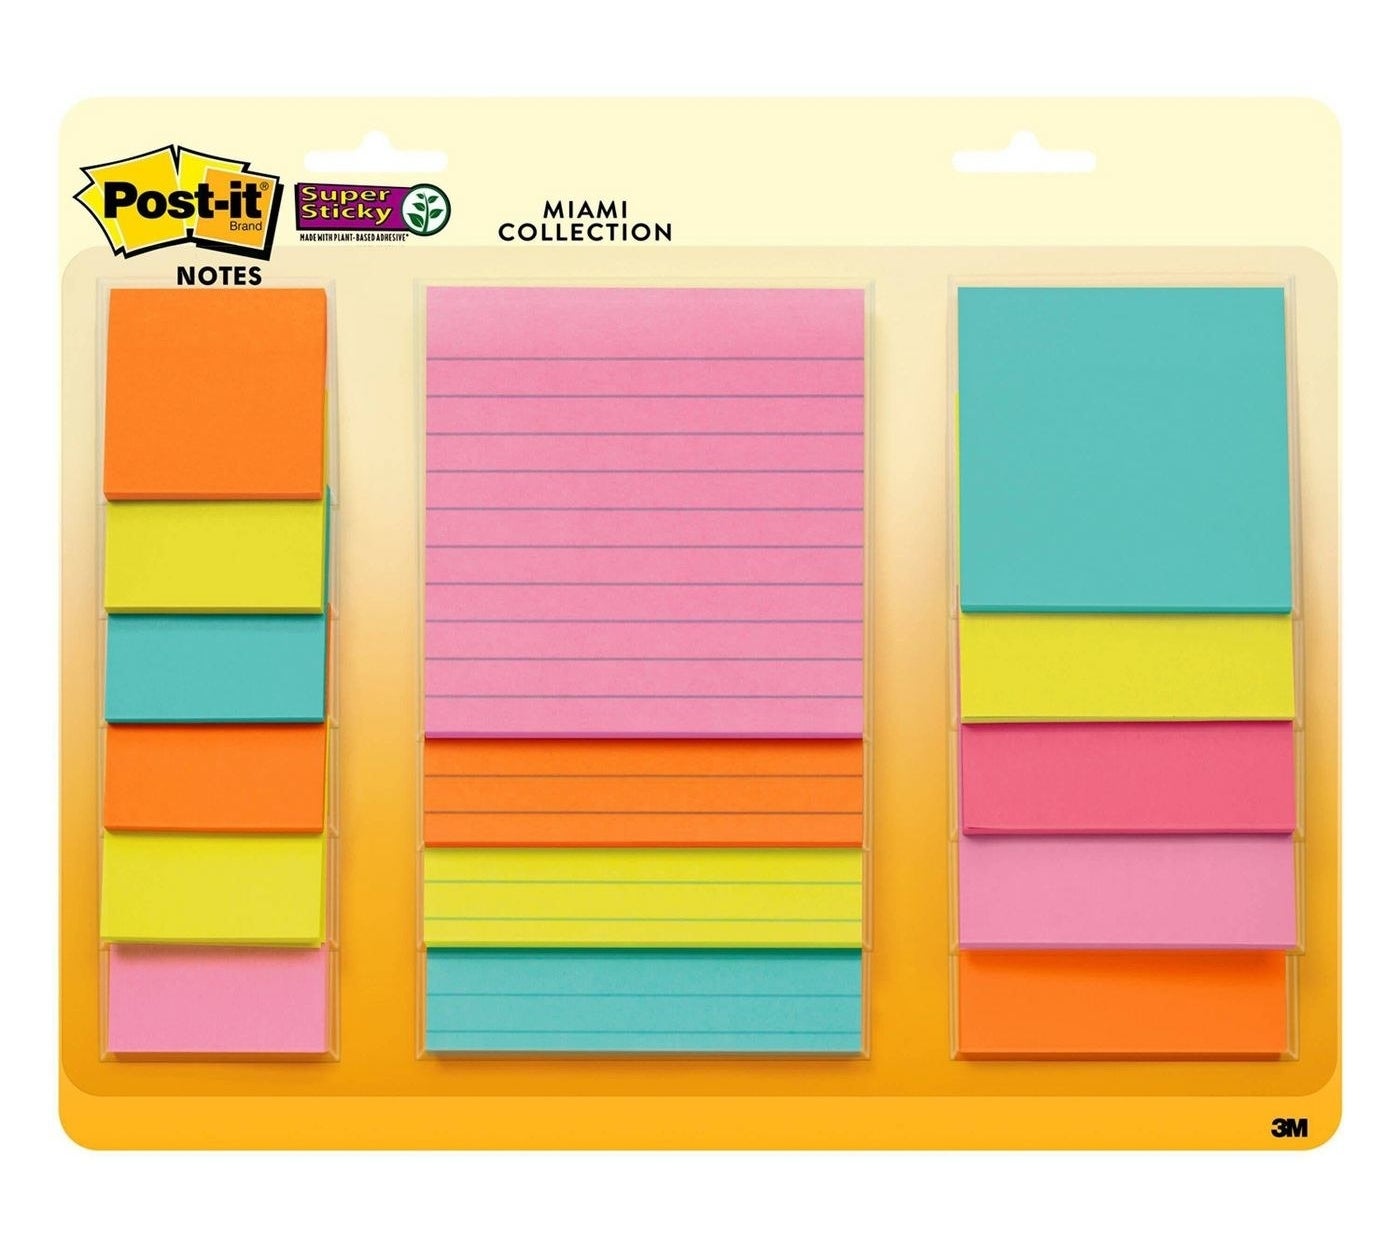 the Miami Collection Post-it 15 count Super Sticky Notes Pack